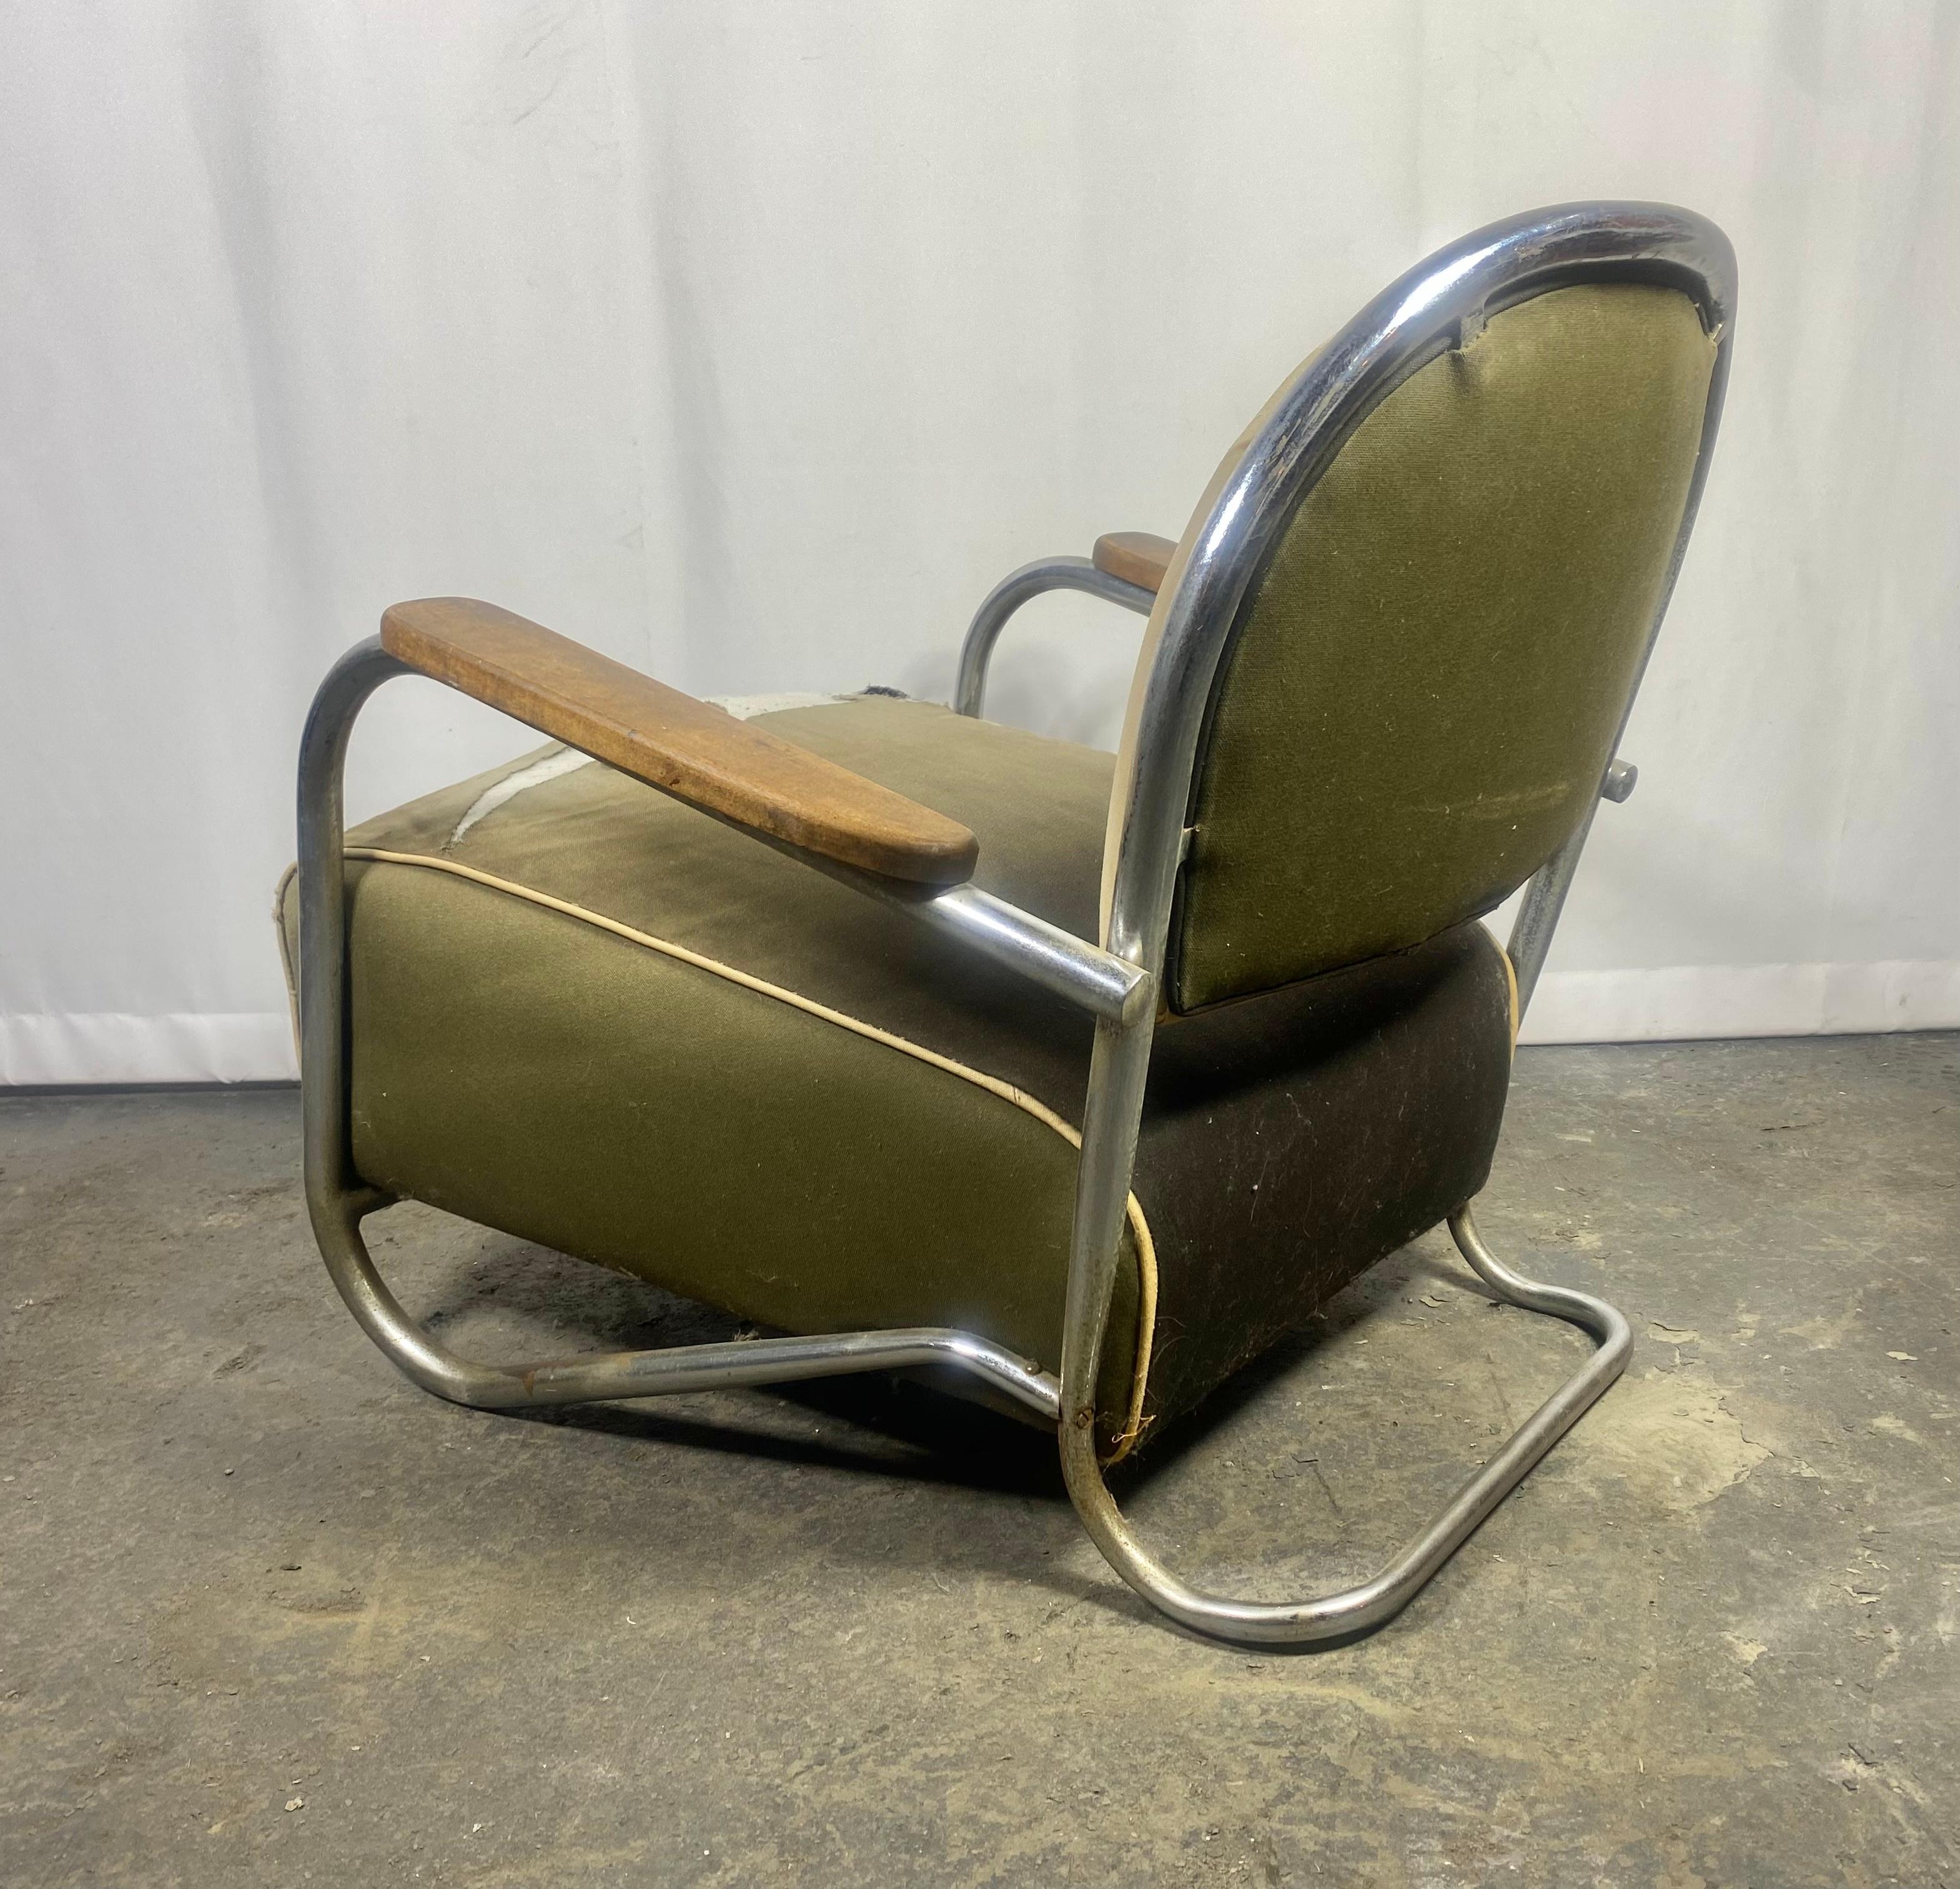 Seldom seen Kem Weber / Lloyds,  Chromed Steel Art Deco Lounge Chair c 1934  In Distressed Condition In Buffalo, NY